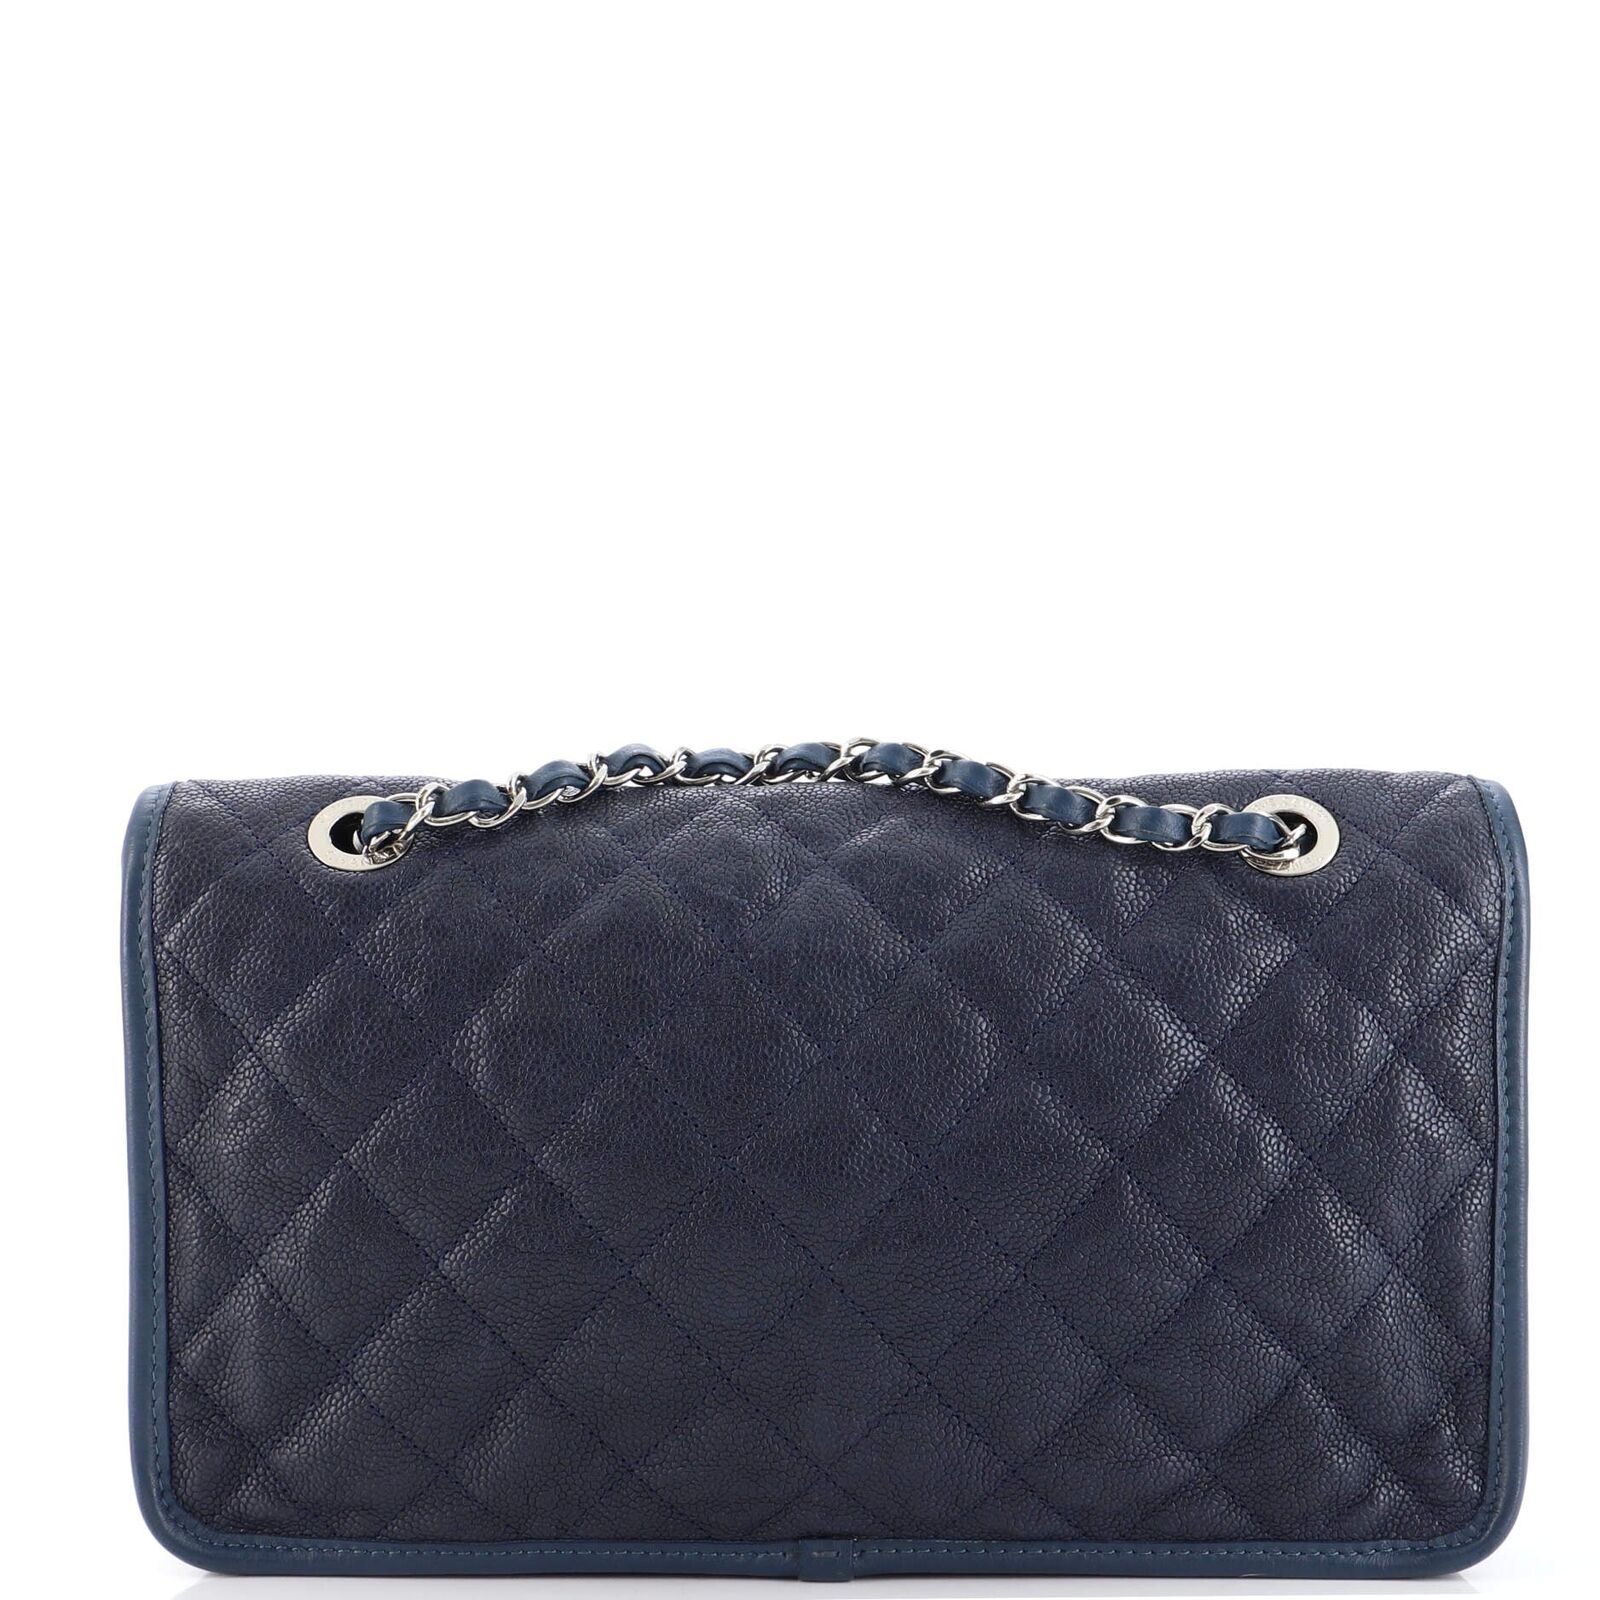 Chanel Black French Riviera Flap Bag Medium Quilted Caviar Leather